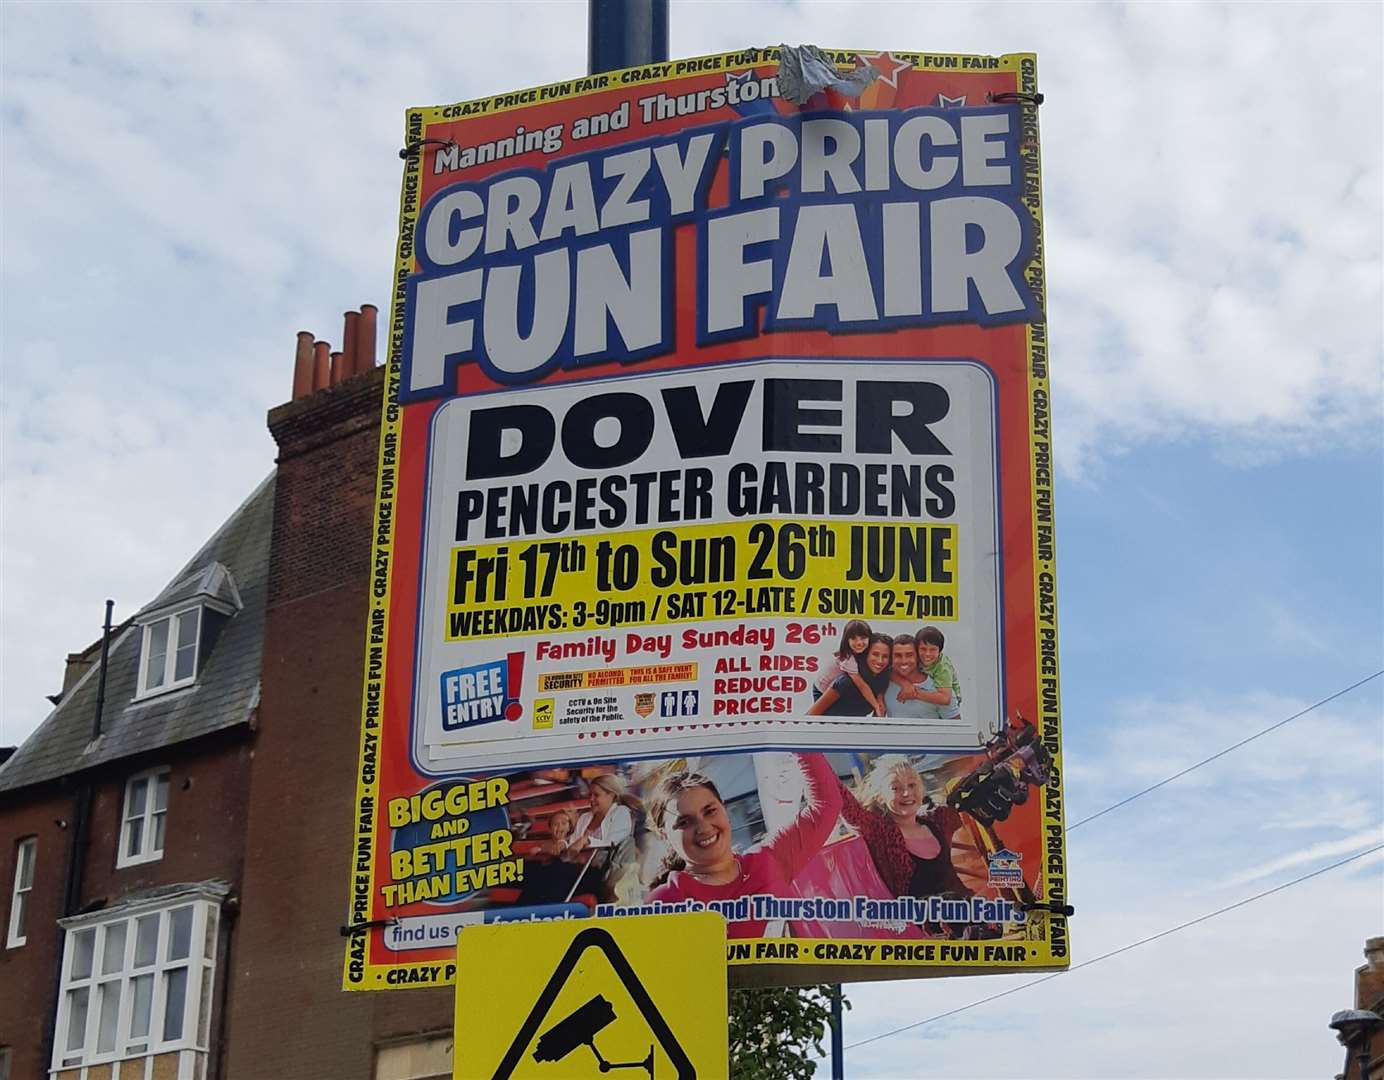 The fun fair in the end took place in June, as advertised here. Picture: KMG